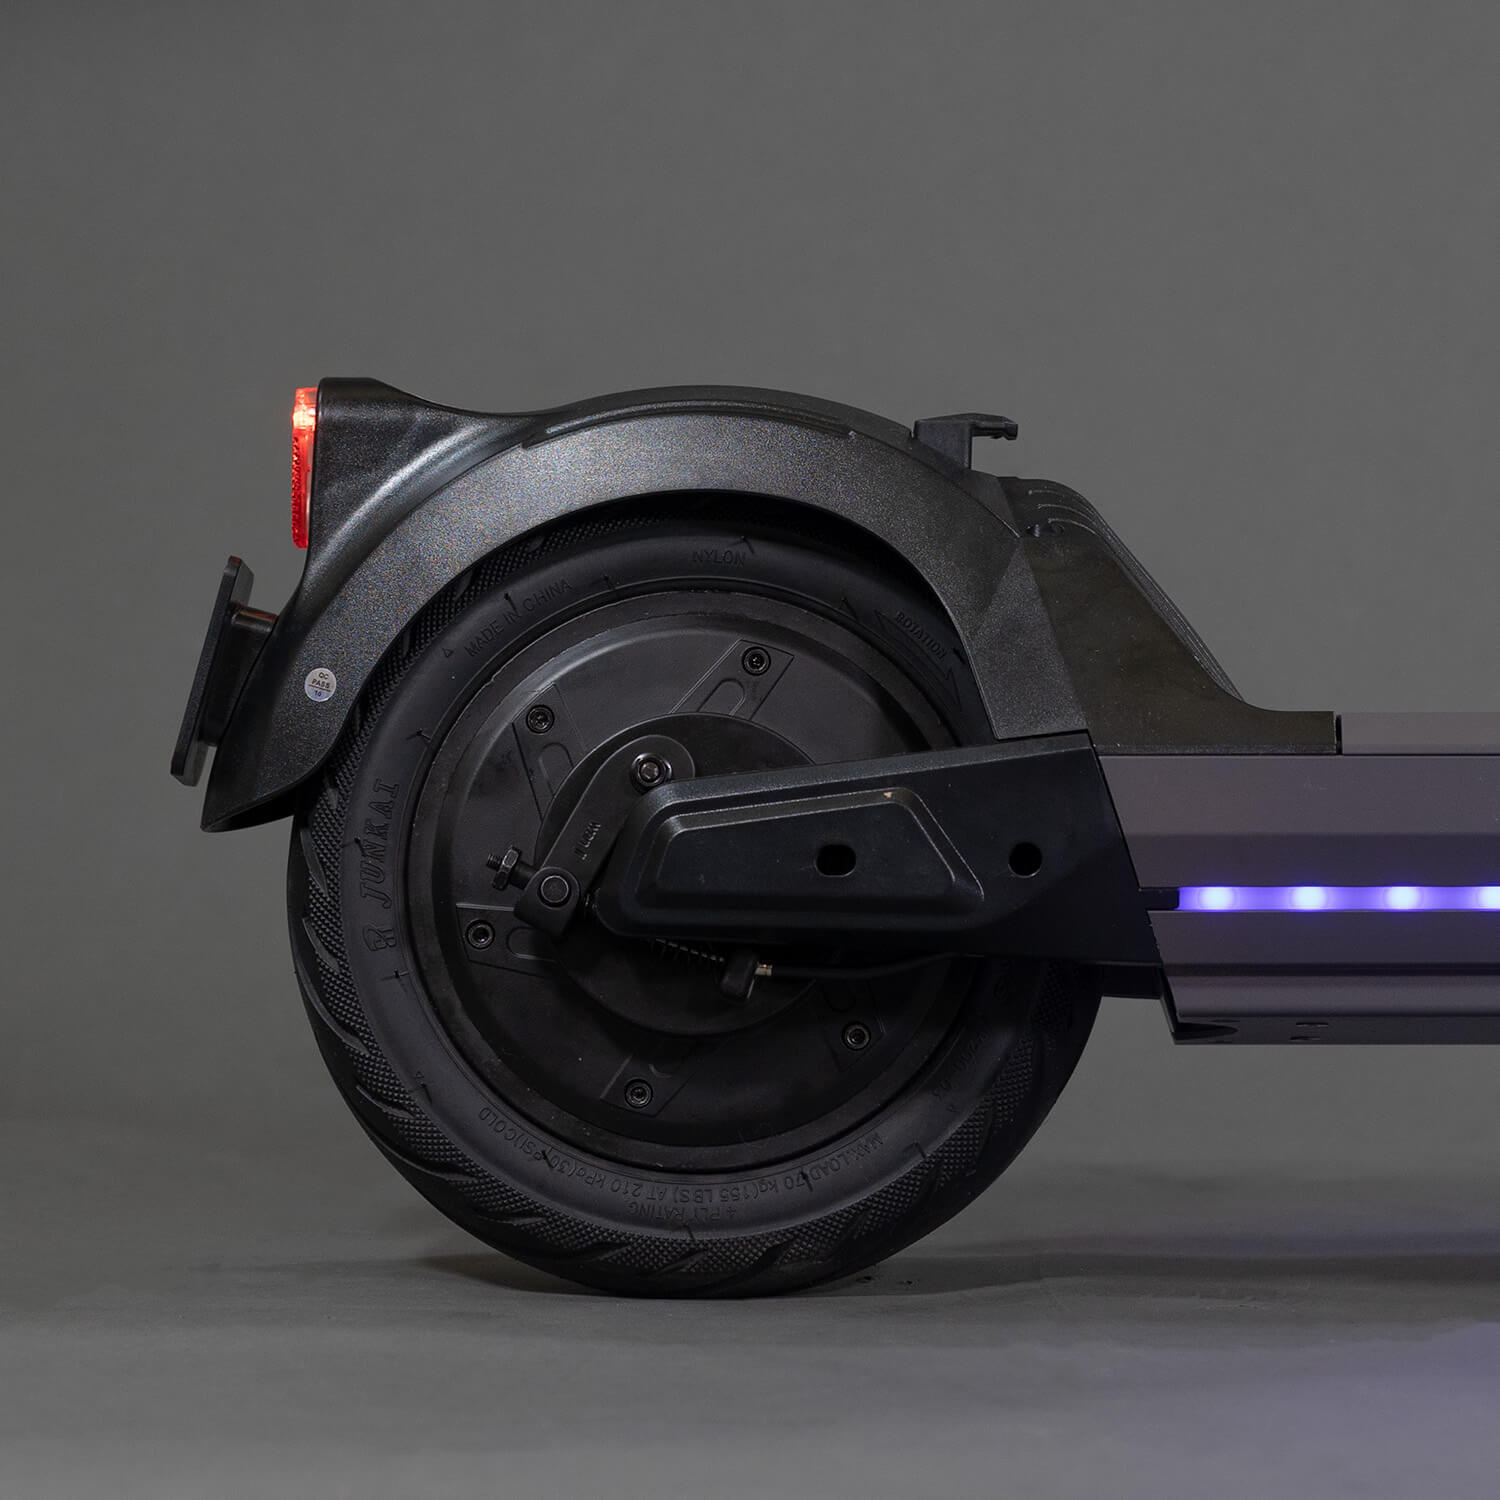 Gotrax G6 Performance Electric Scooter Foldable Plus Ambient Lights 10*2.5"-Max 51KM Range & 32KPH Max Speed